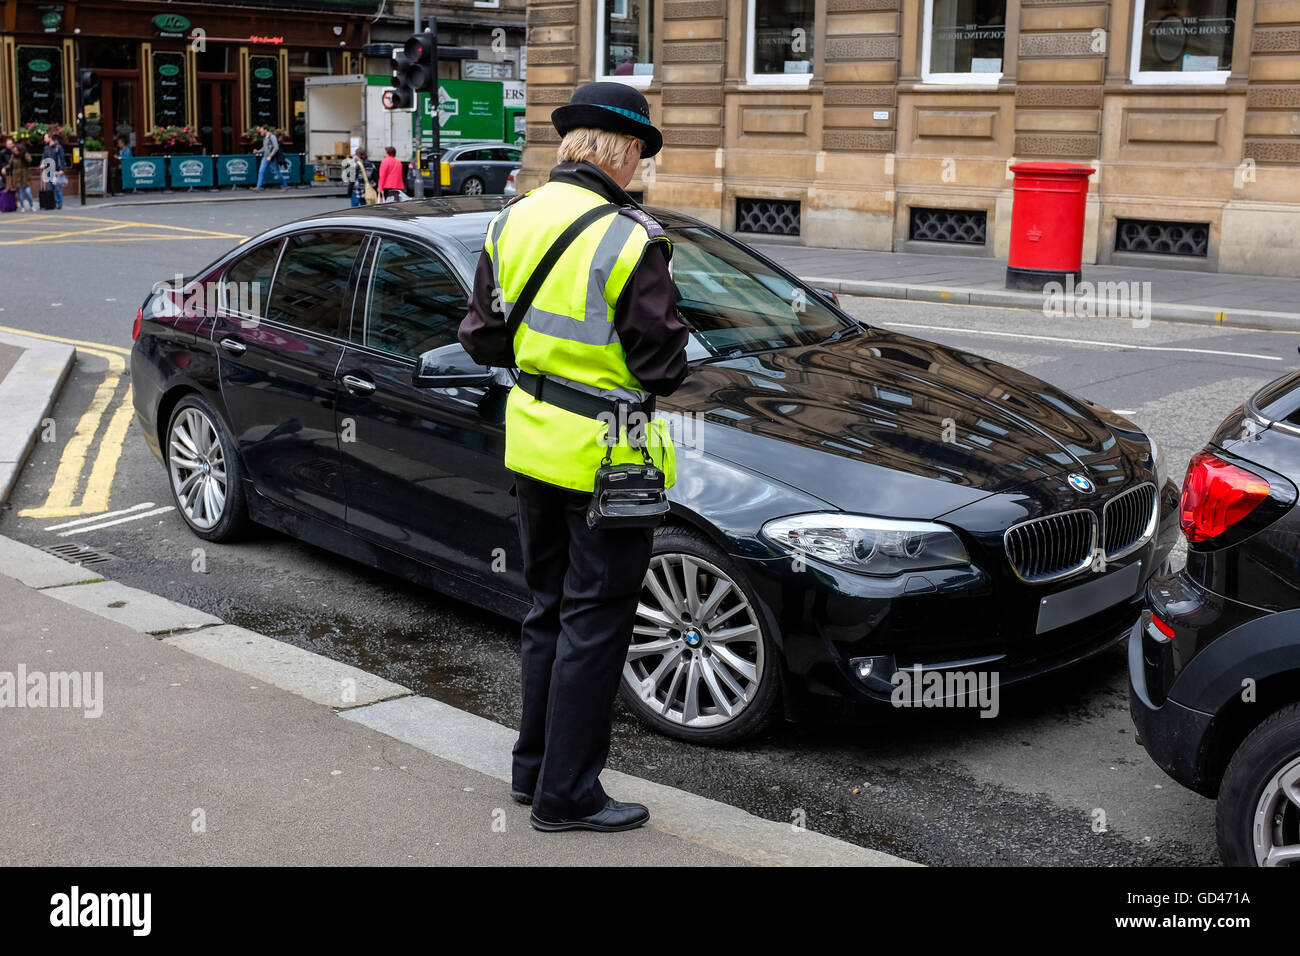 Traffic warden issuing a parking ticket to a BMW saloon car parked illegally, Queen Street, Glasgow, Scotland, UK Stock Photo